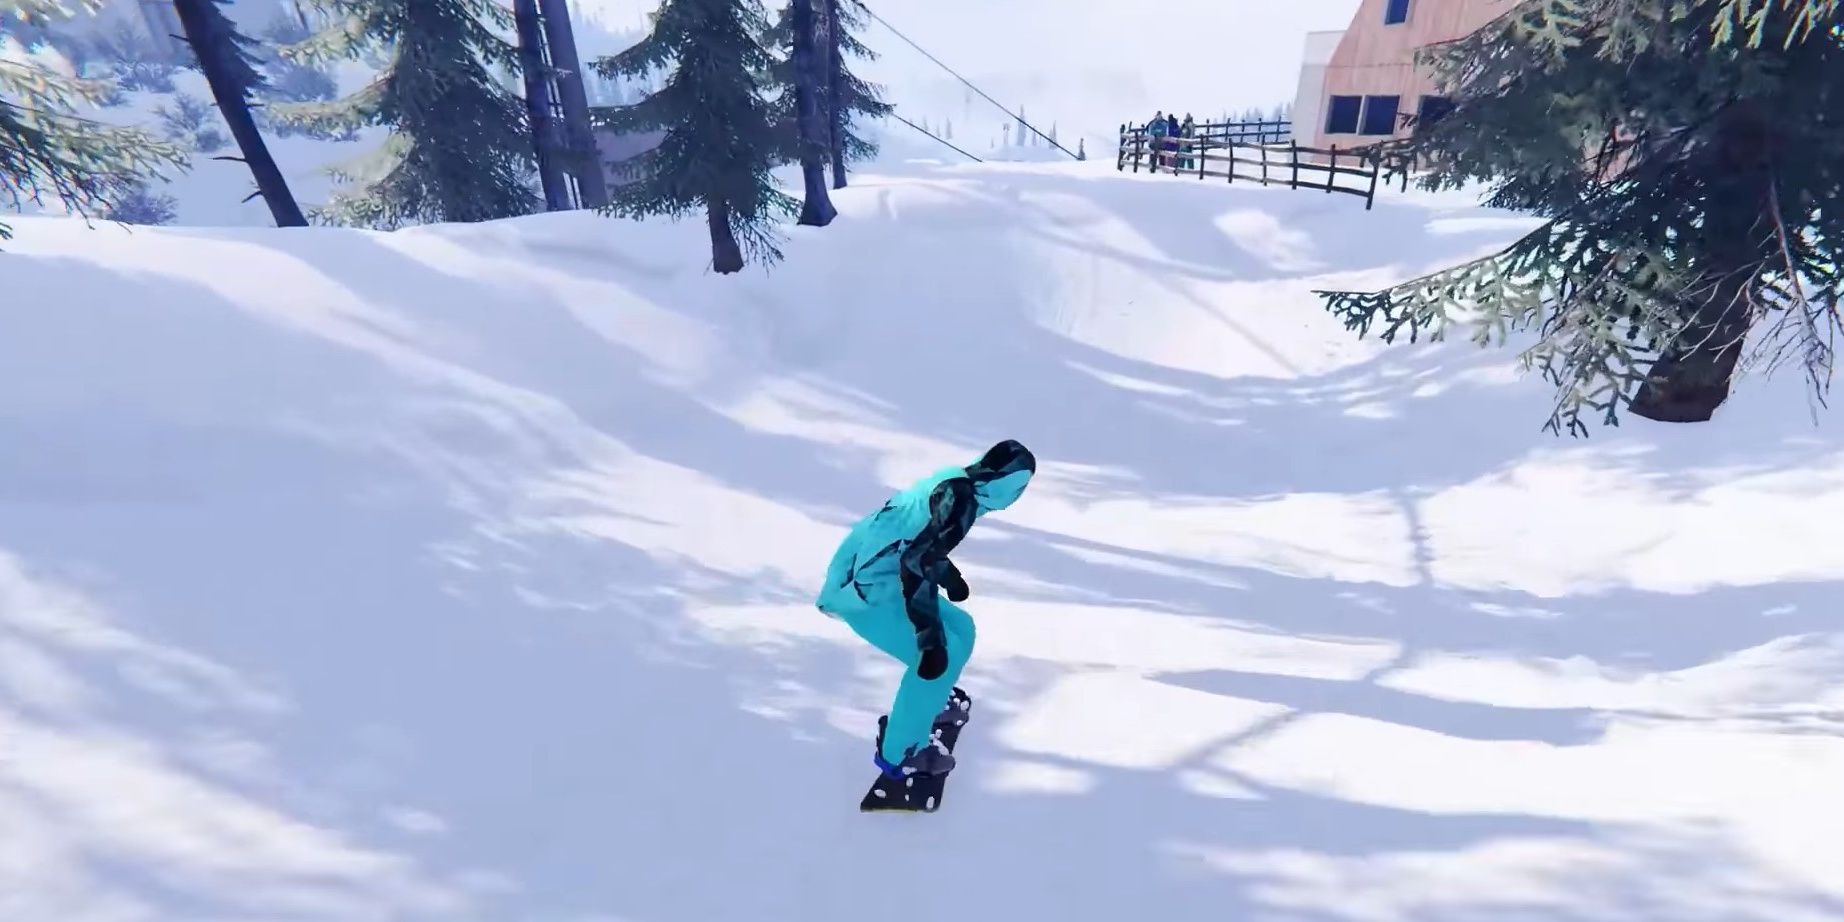 riding down a mountain slope in shredders